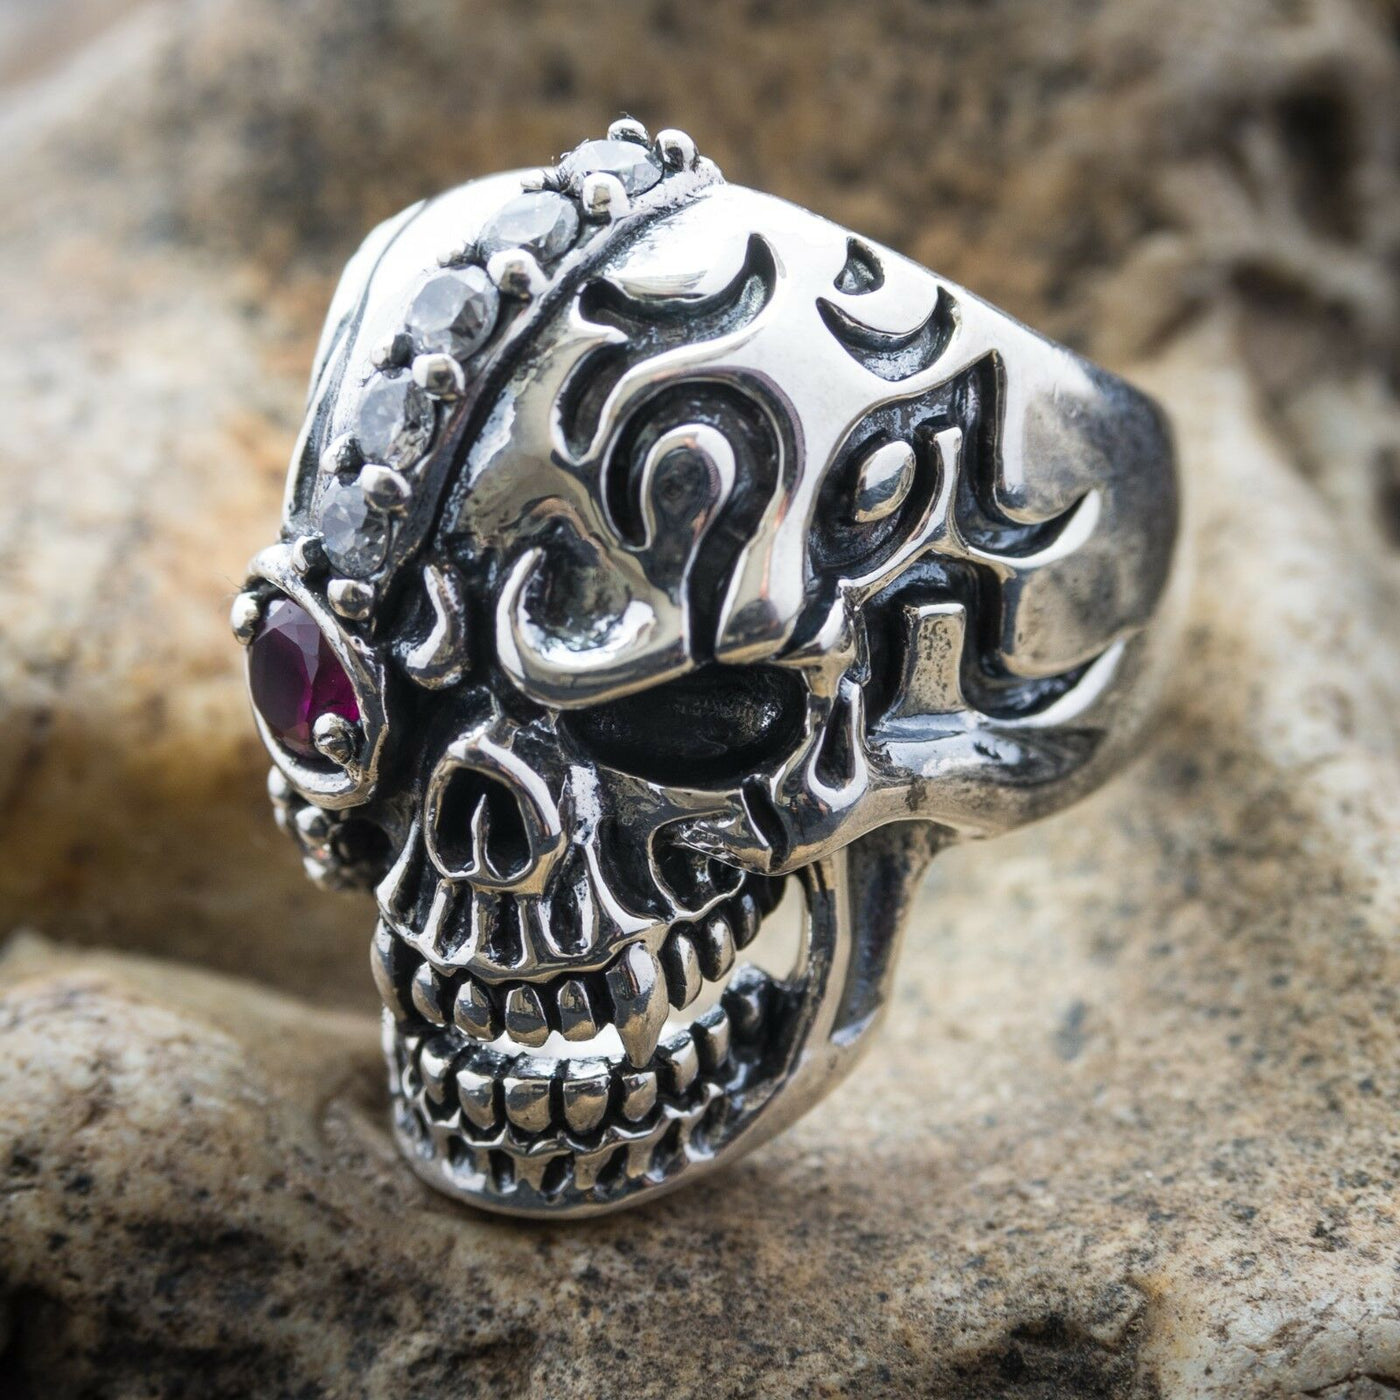 Pirate skull .925 sterling silver Metal Biker Gothic Punk his & hers feeanddave